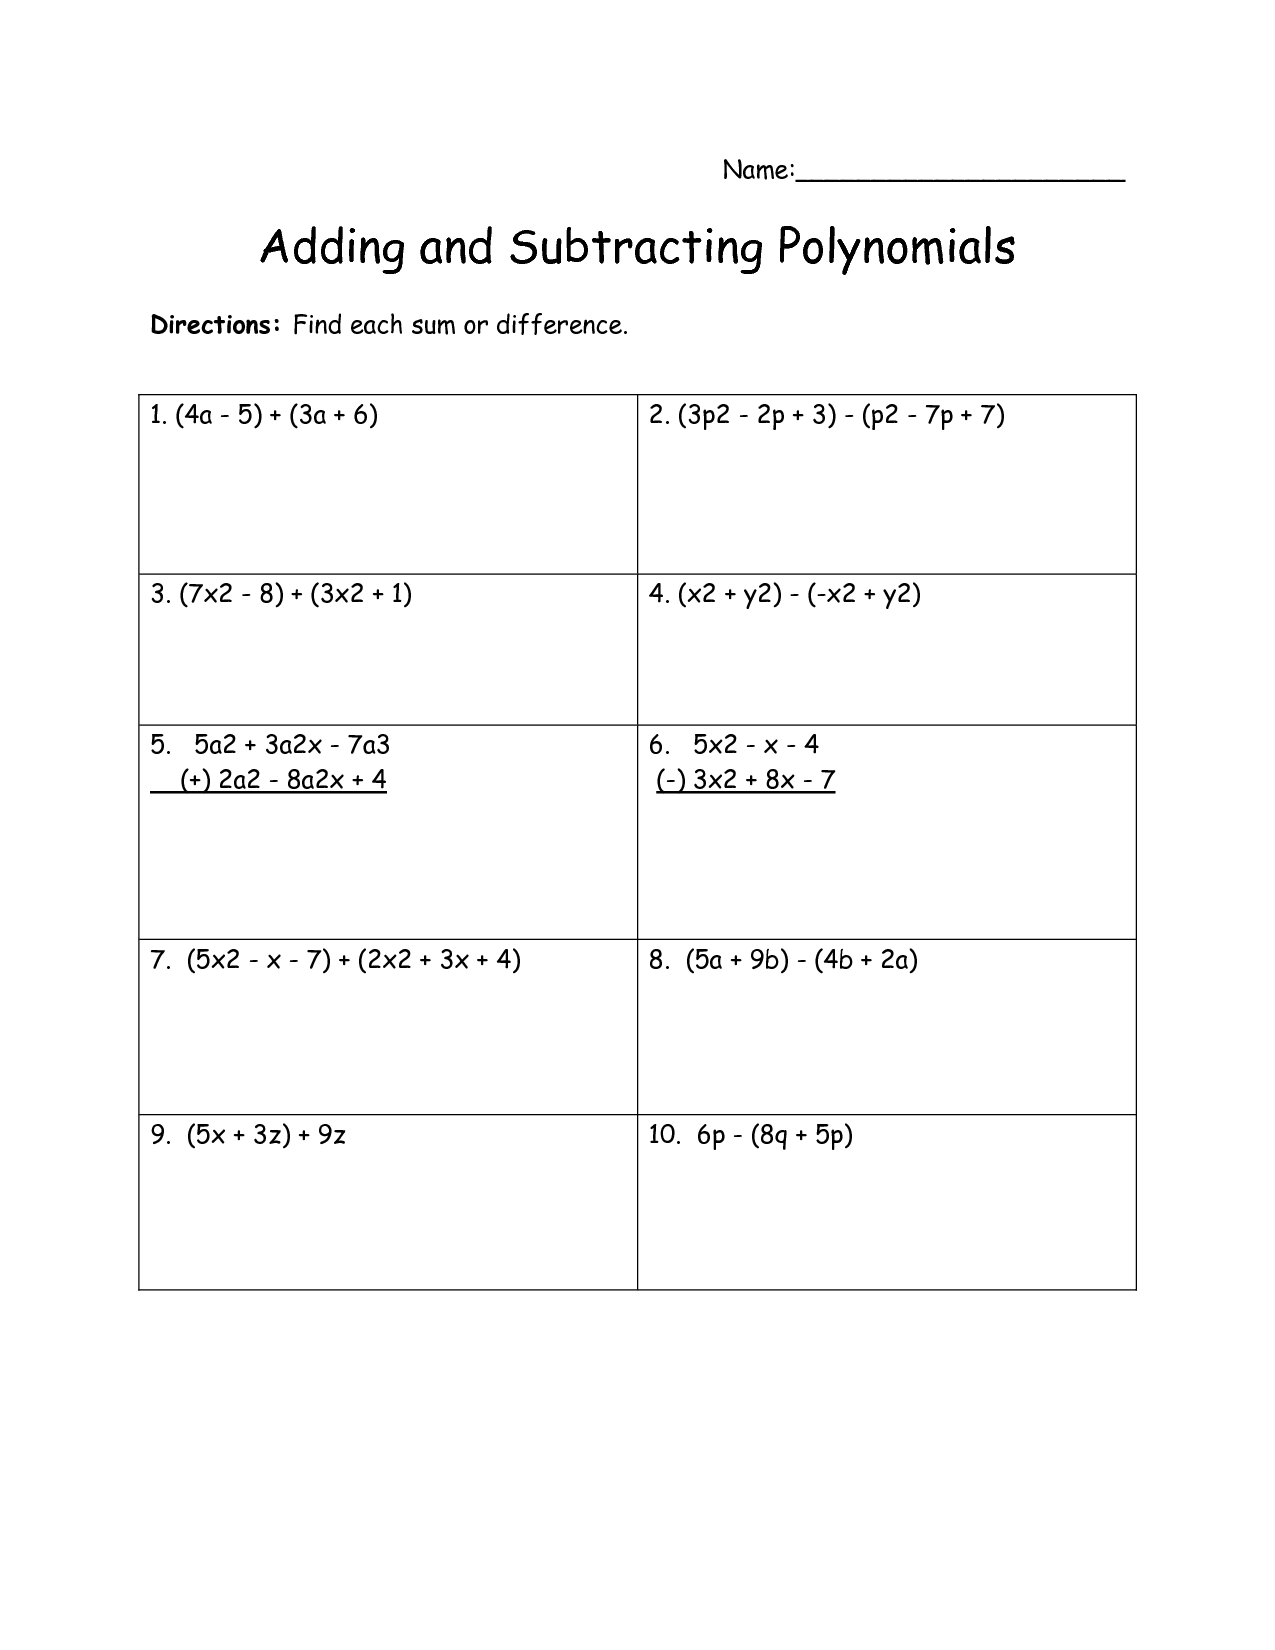 Adding and Subtracting Polynomials Worksheets Image